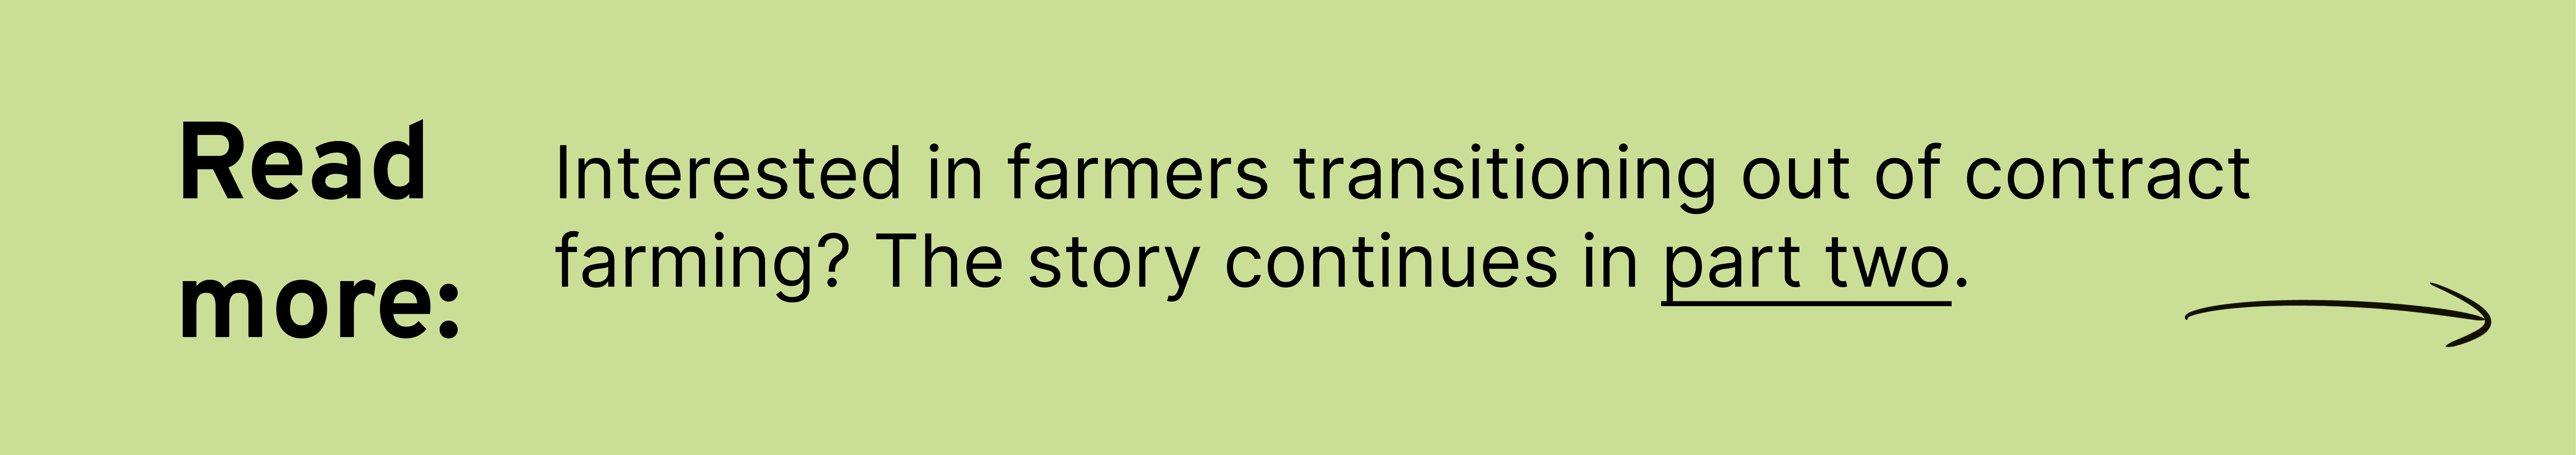 Read more: Interested in farmers transitioning out of contract farming? The story continues in part two.